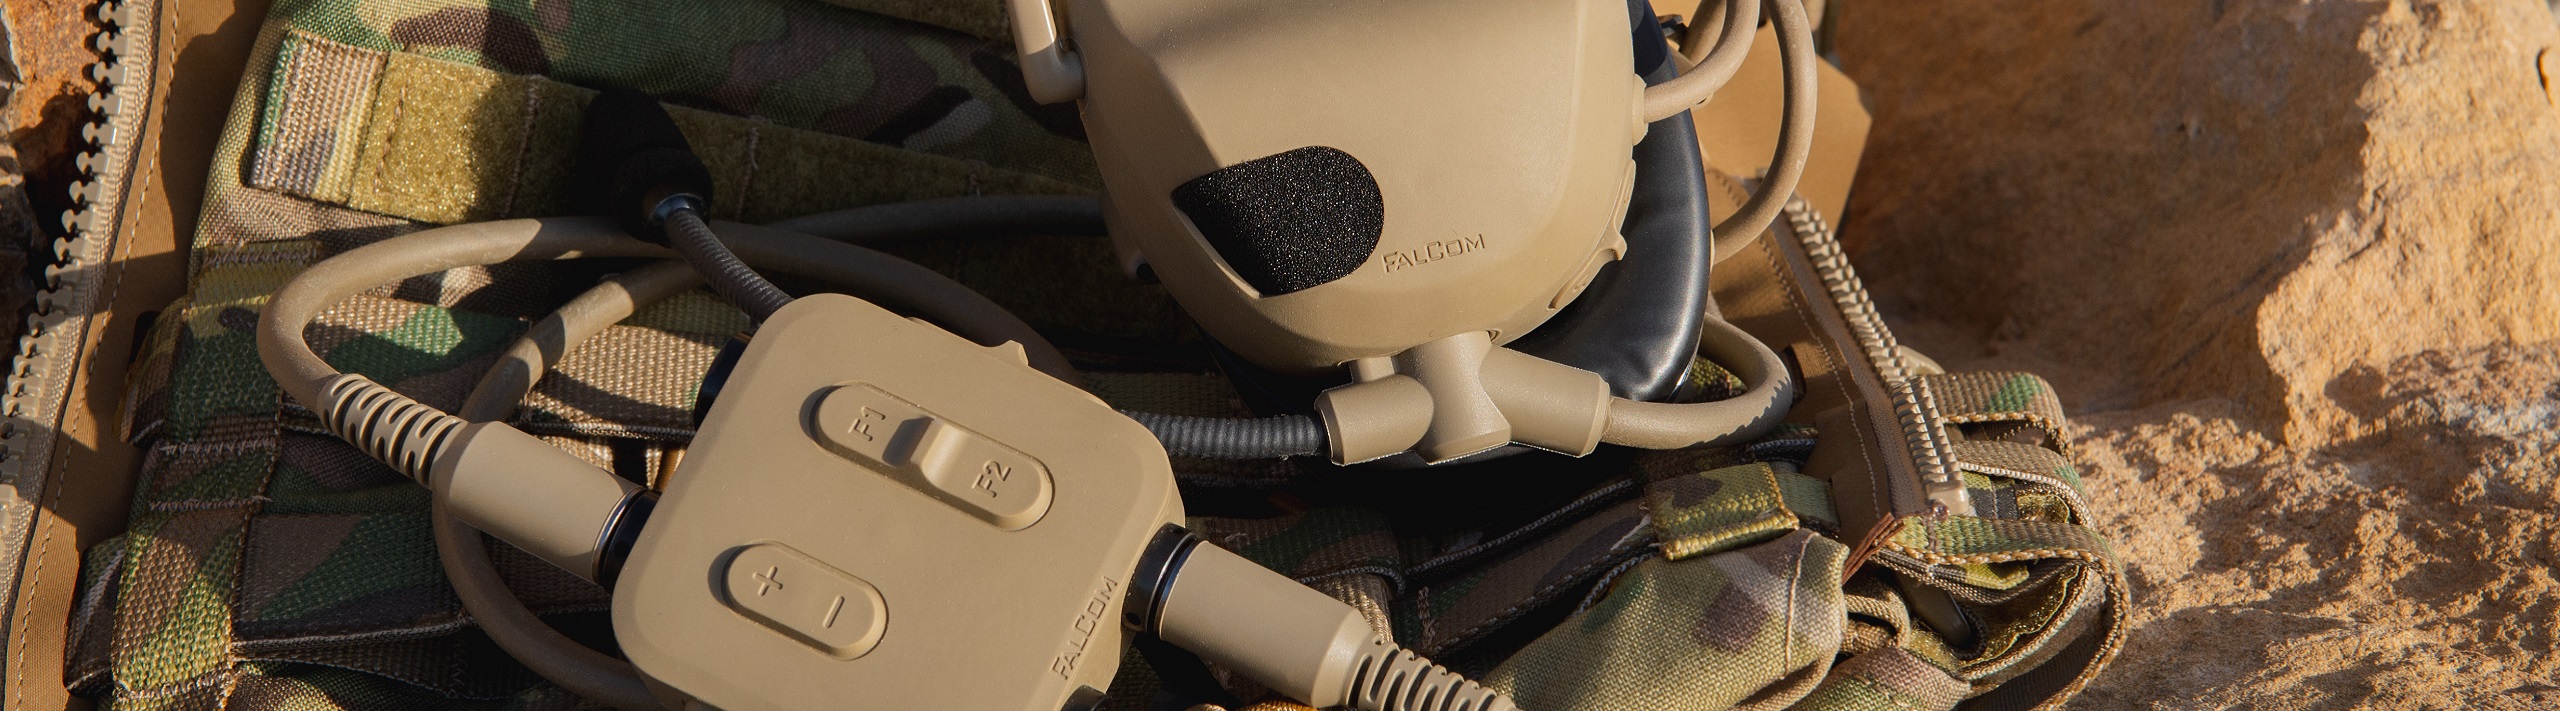 FalCom introduces next-generation hearing protection and communications system